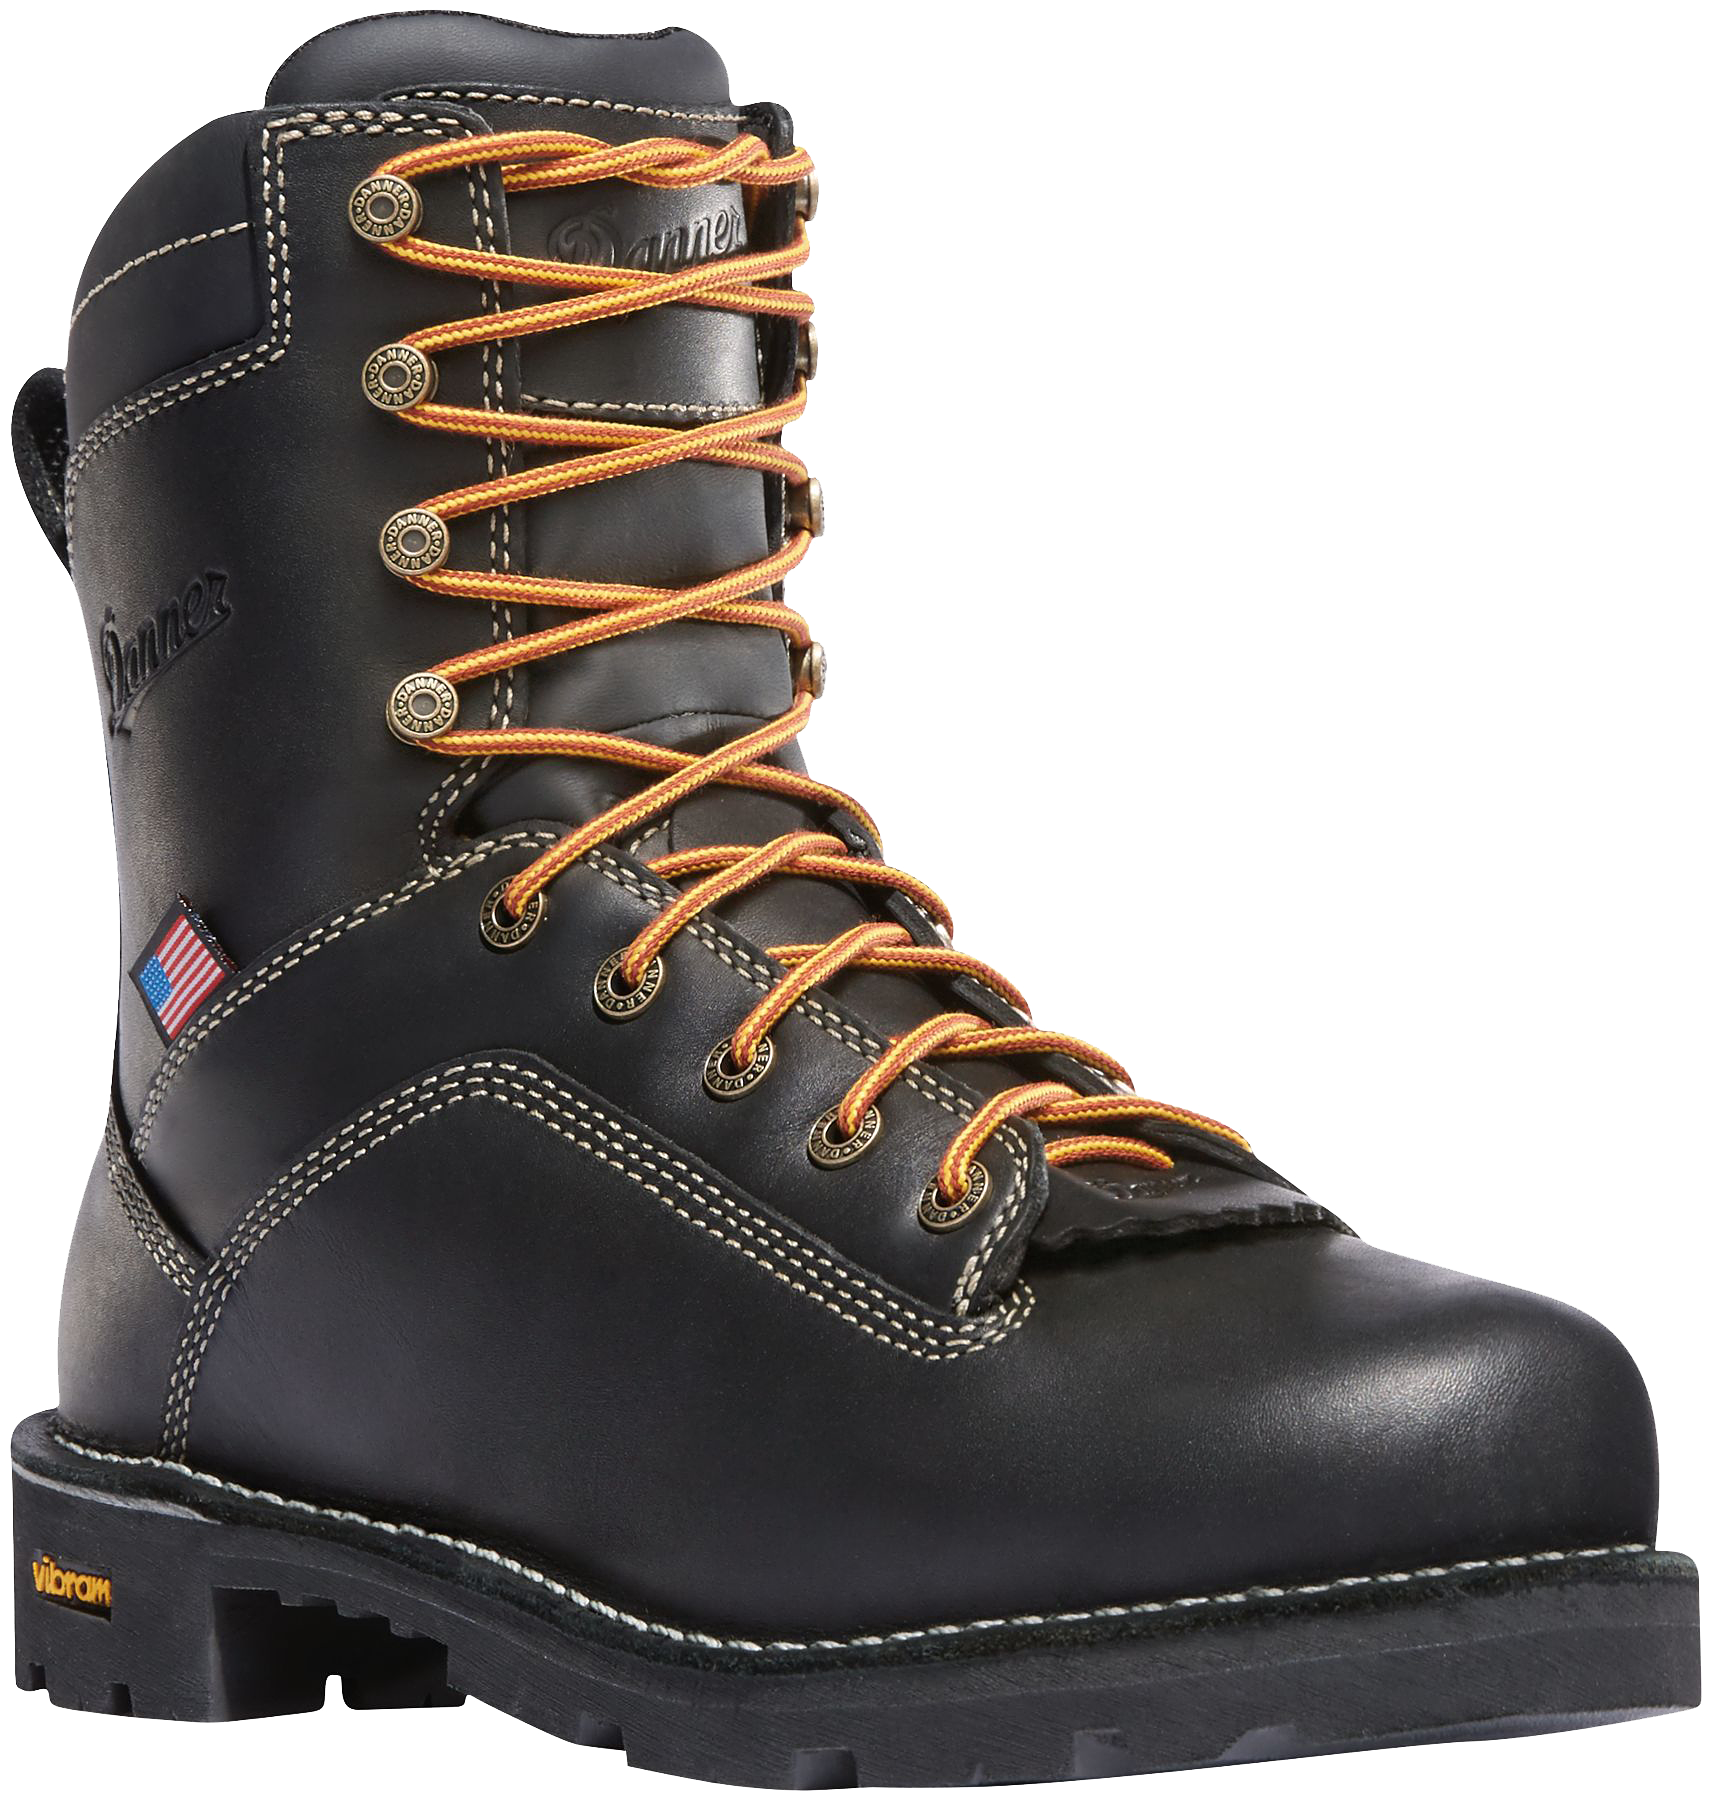 Danner Quarry USA Brown GORE-TEX Alloy Toe Work Boots for Men - Black - 10M